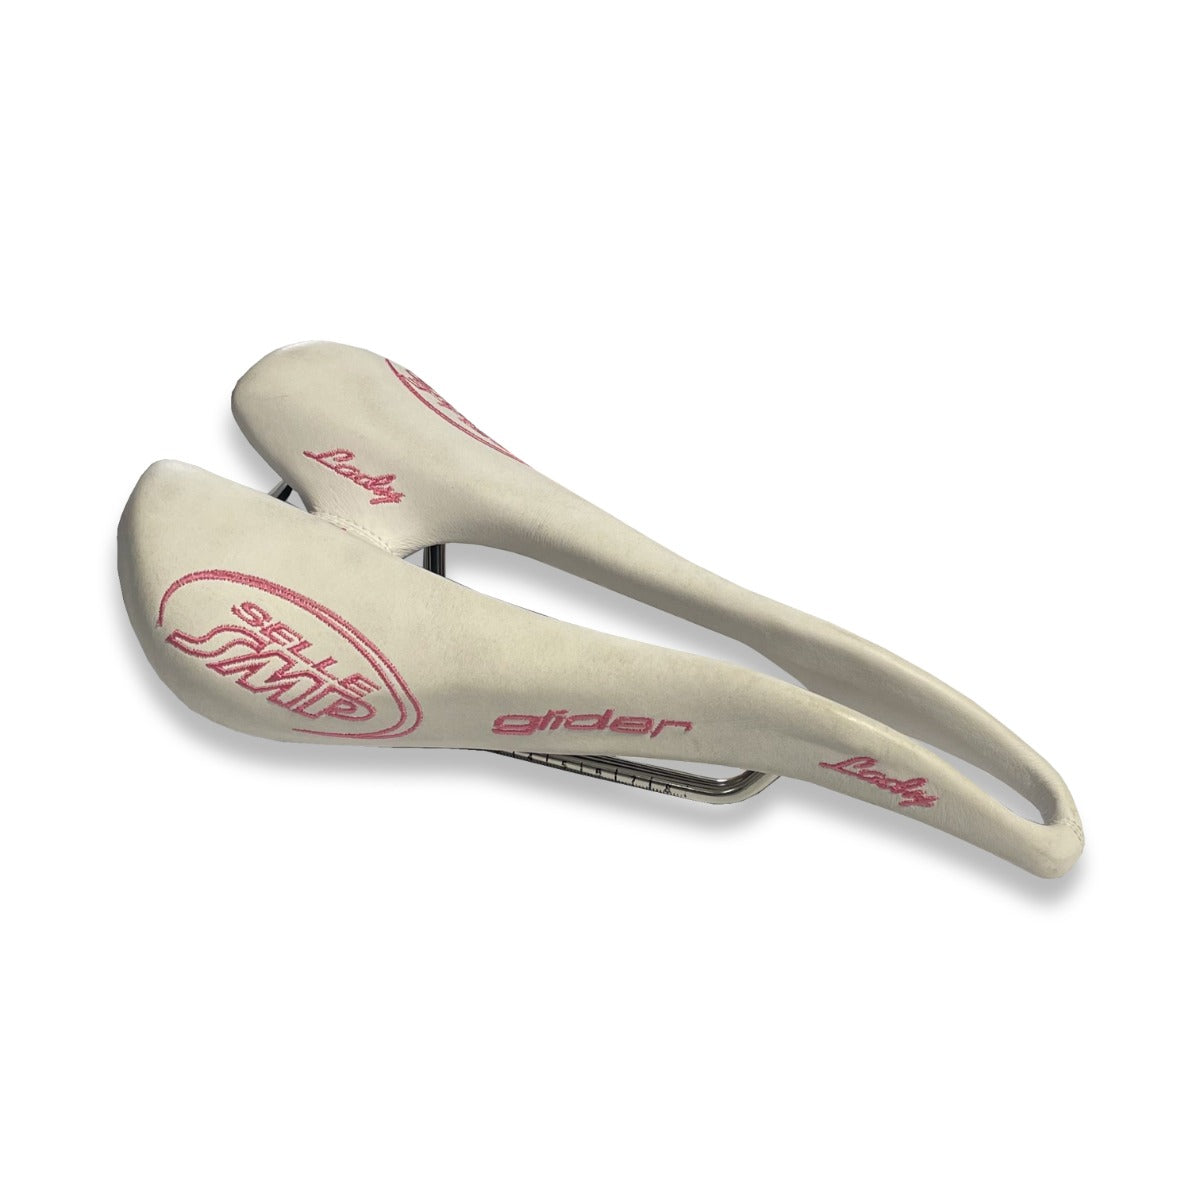 Selle SMP Glider Womens Saddle - White